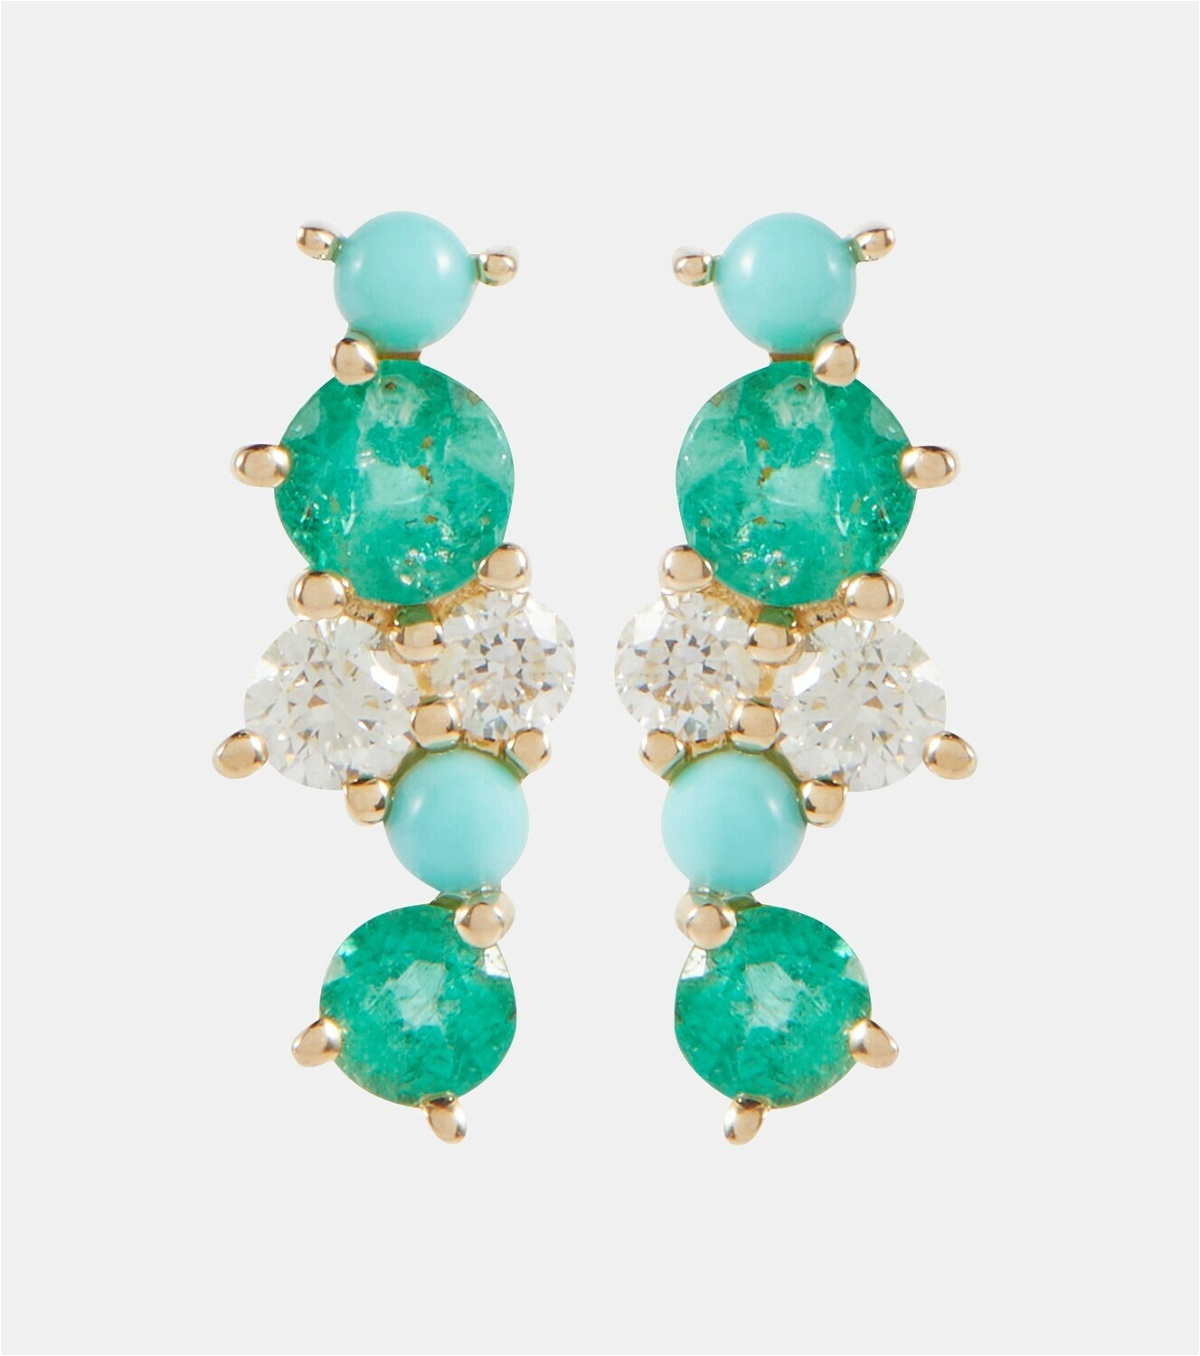 Sydney Evan 14kt gold stud earrings with diamonds and emeralds